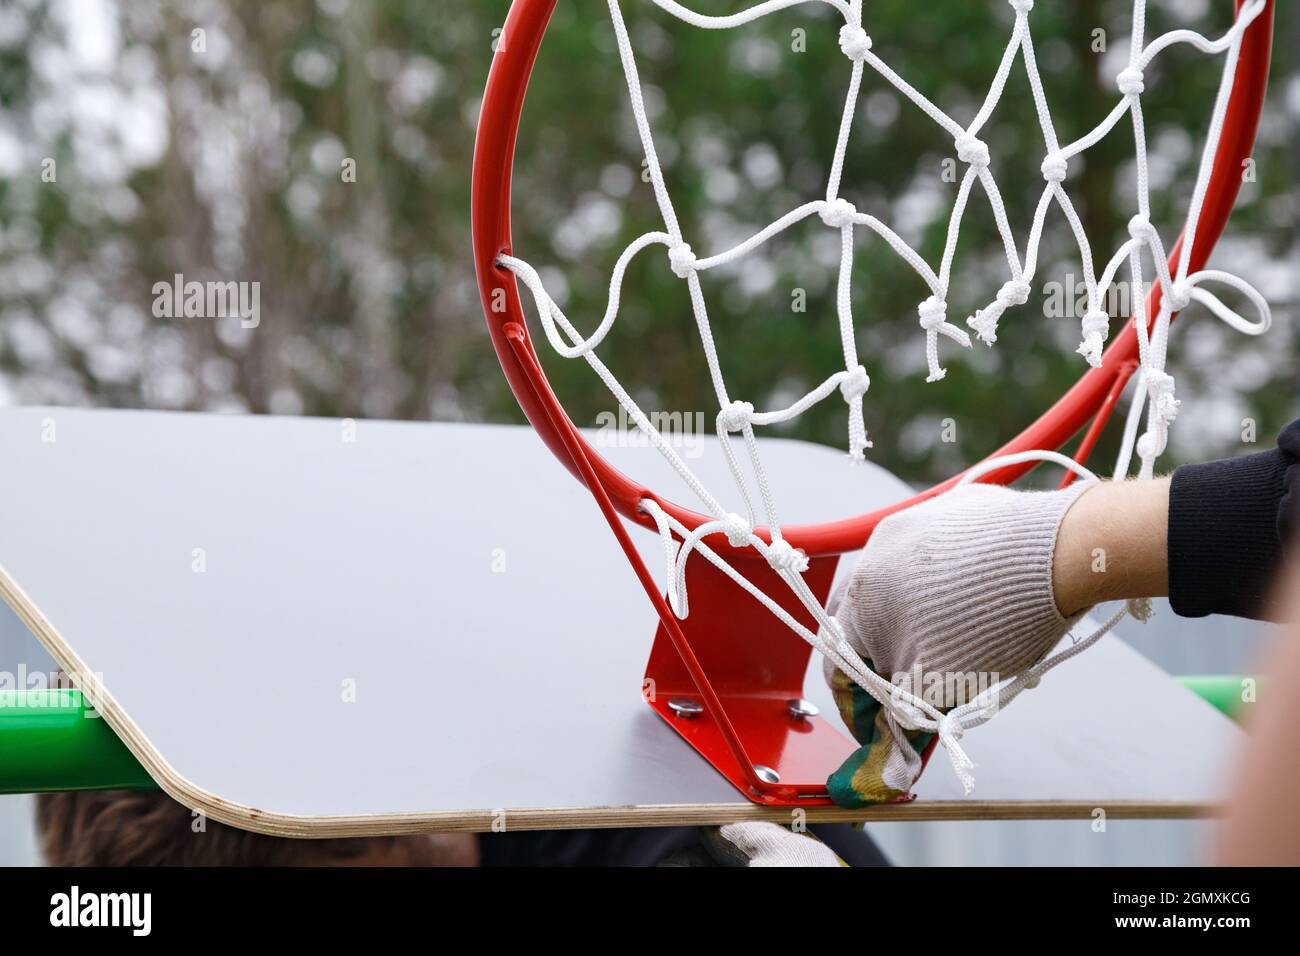 Photo of the basketball ring installation in cloudy day in the summer Stock Photo